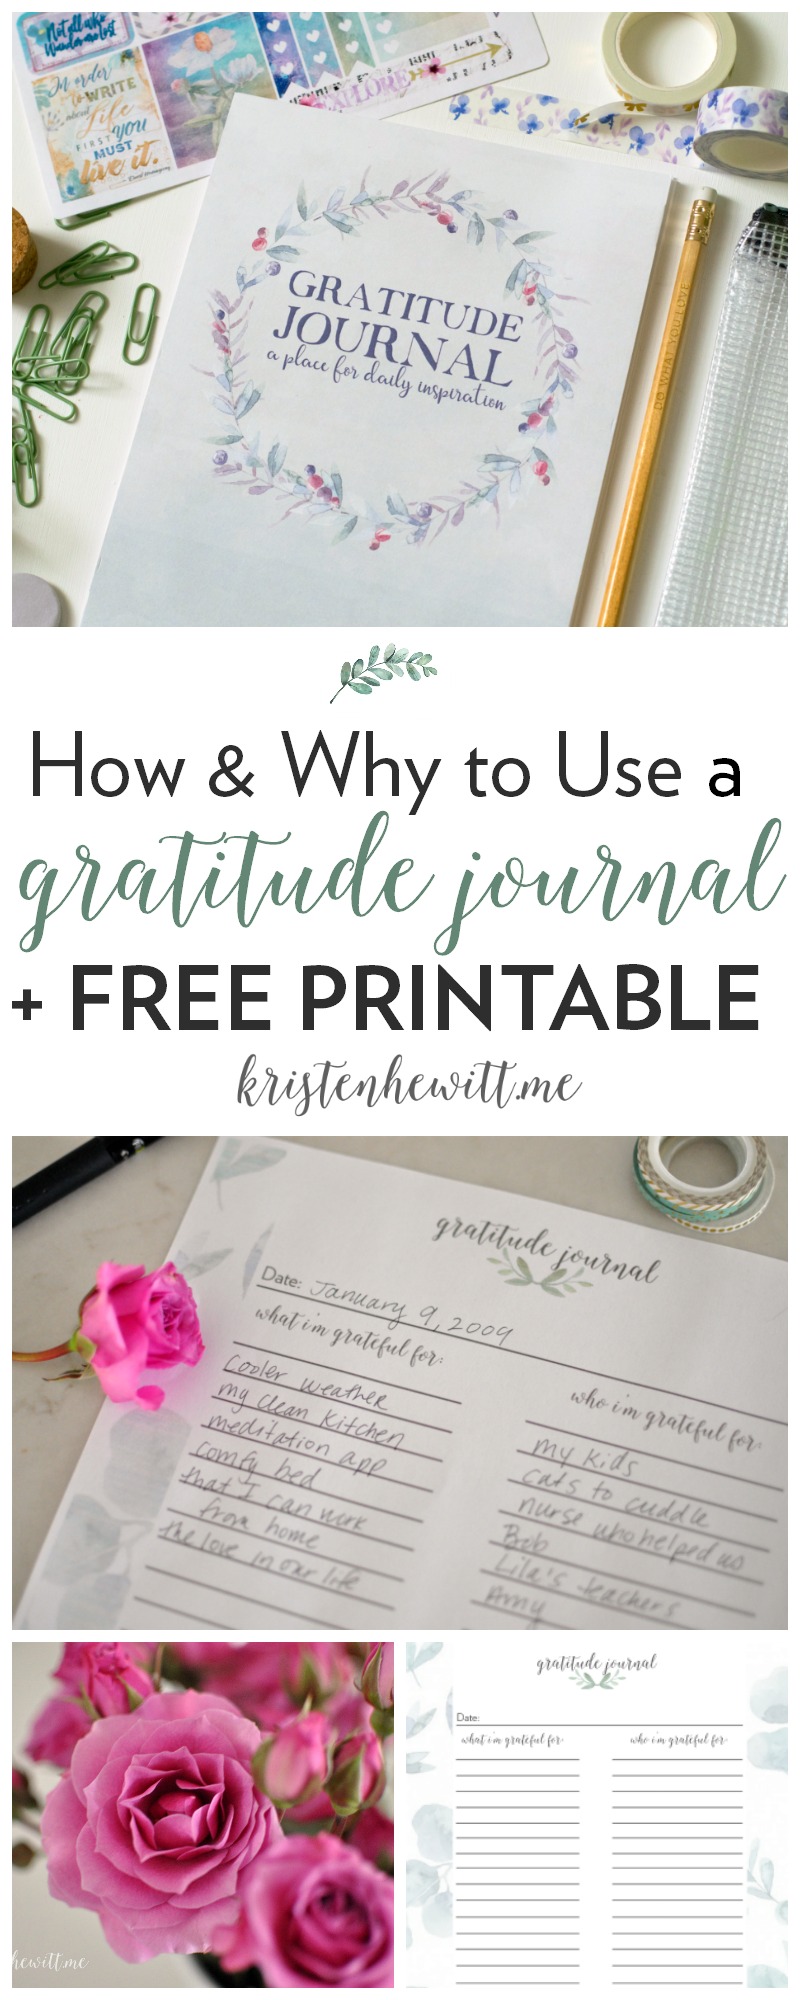 Are you struggling in any aspect of your life and not sure how to get past it? Try using a gratitude journal, it will help put life into perspective!